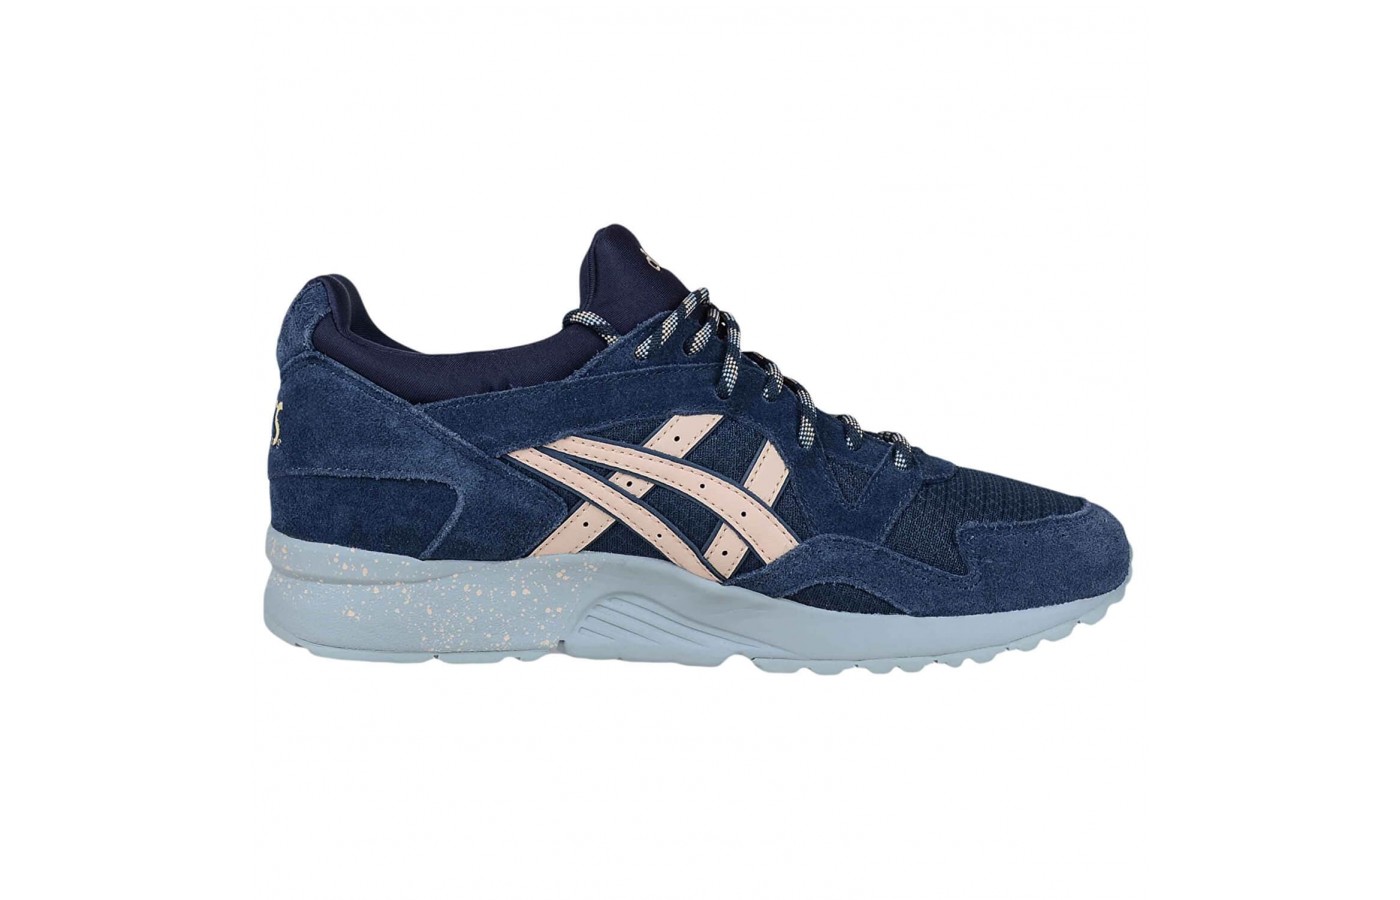 The Asics Gel Lyte V comes in a variety of upper materials